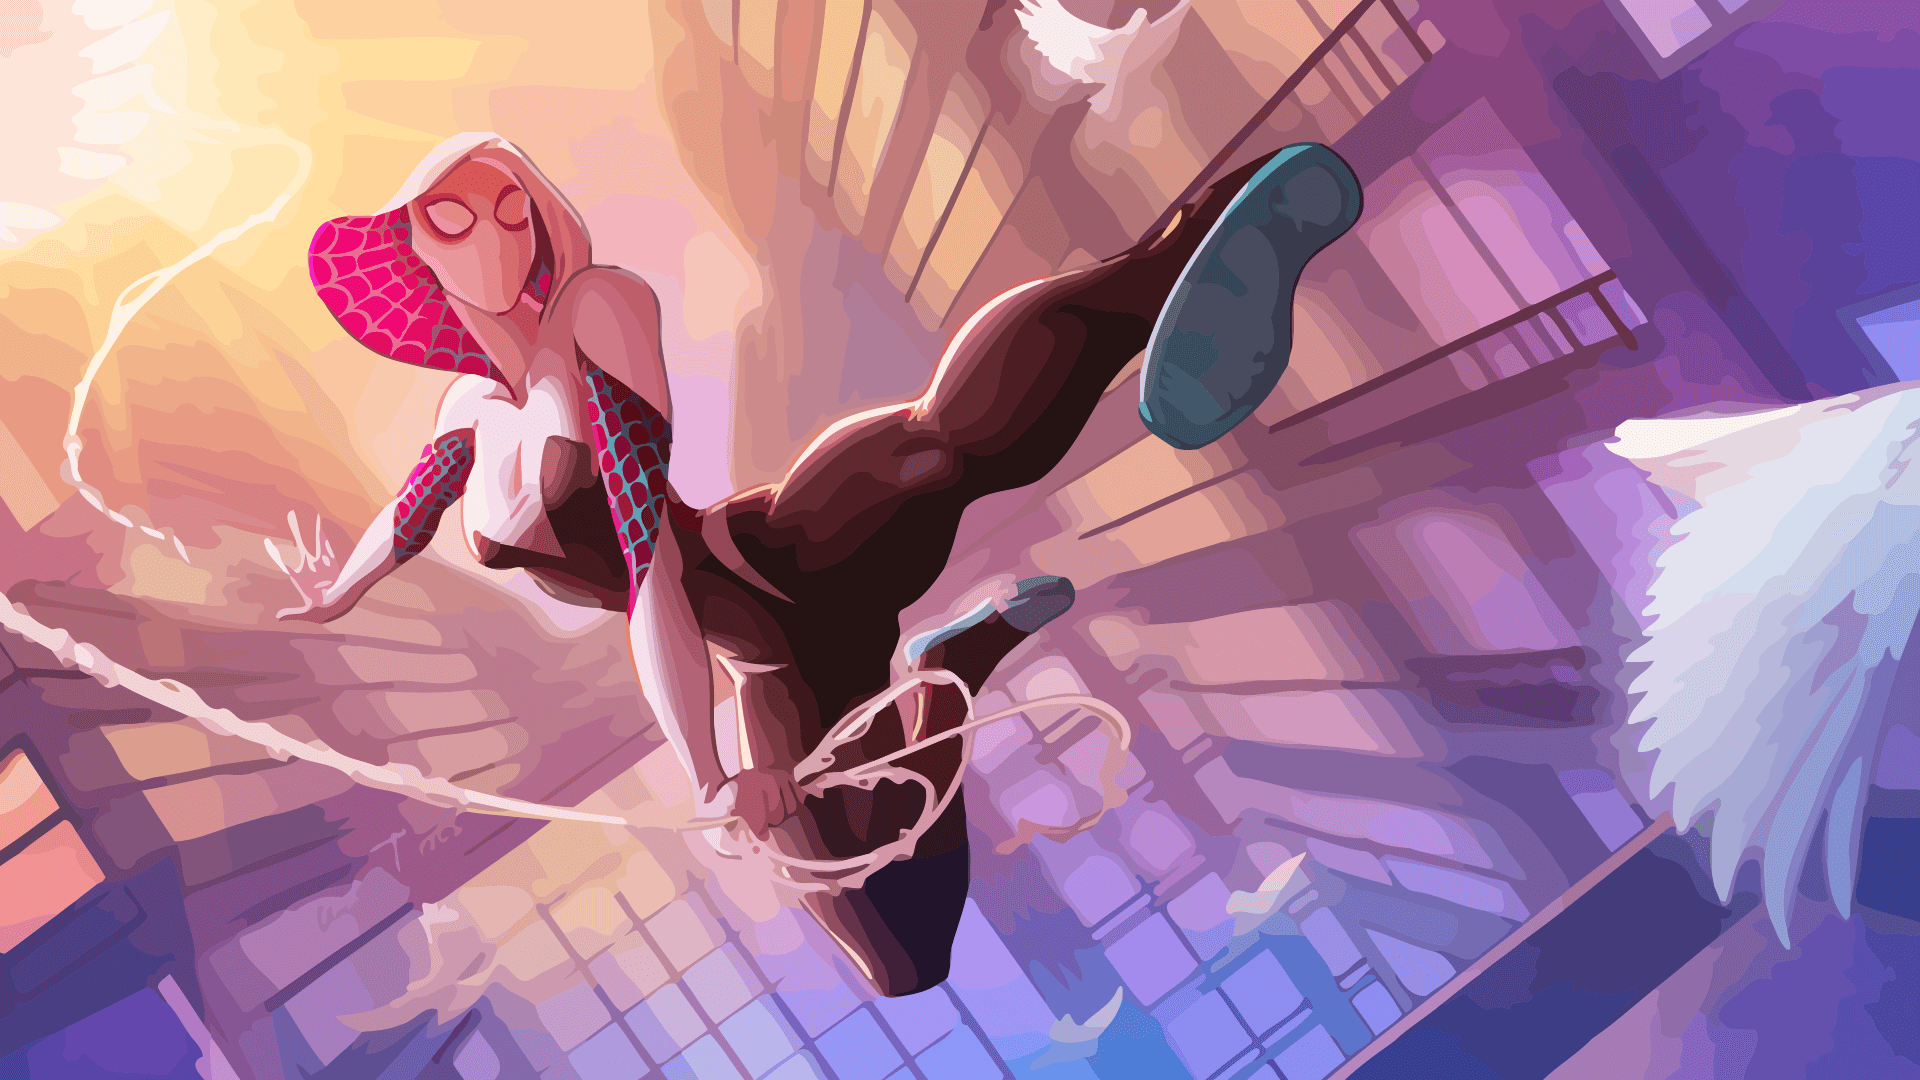 New Anime Spider Girl HD Wallpaper + What You Didn't Know!